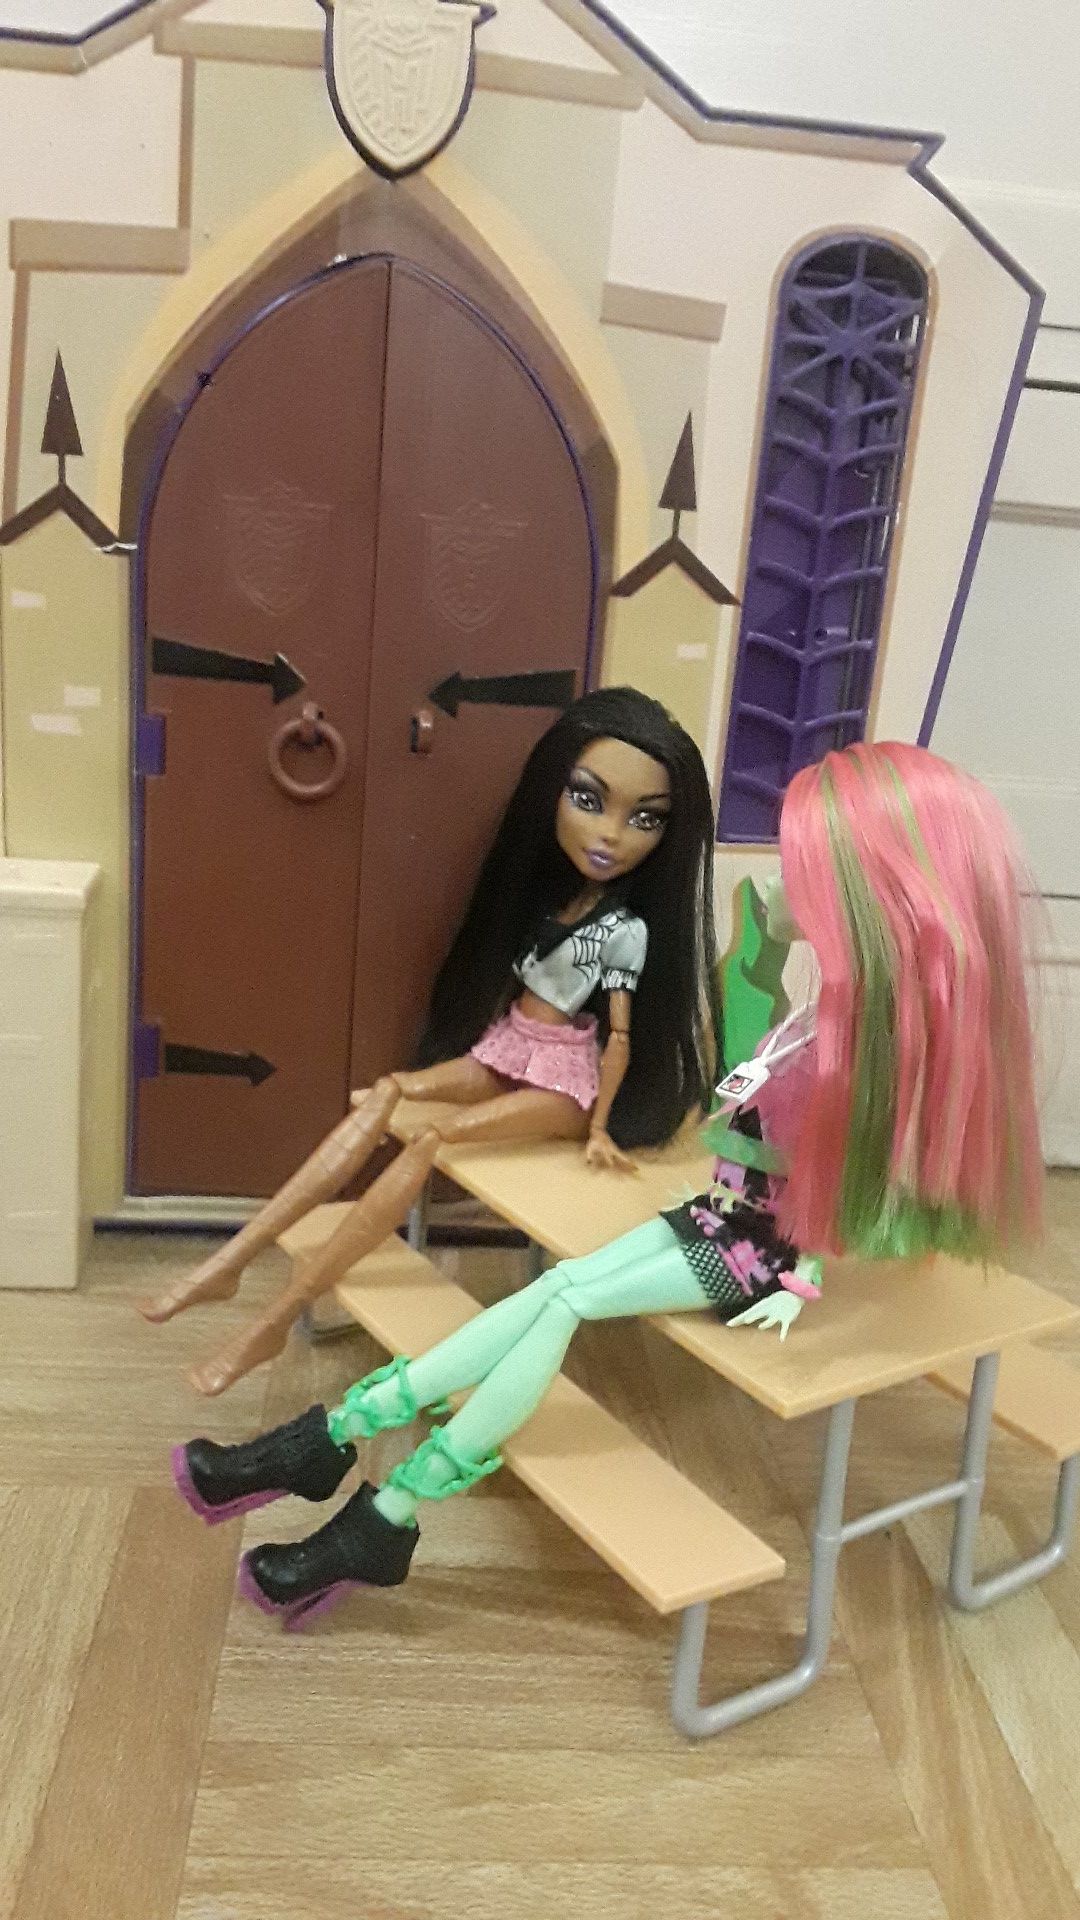 Monster high school with 2 dolls